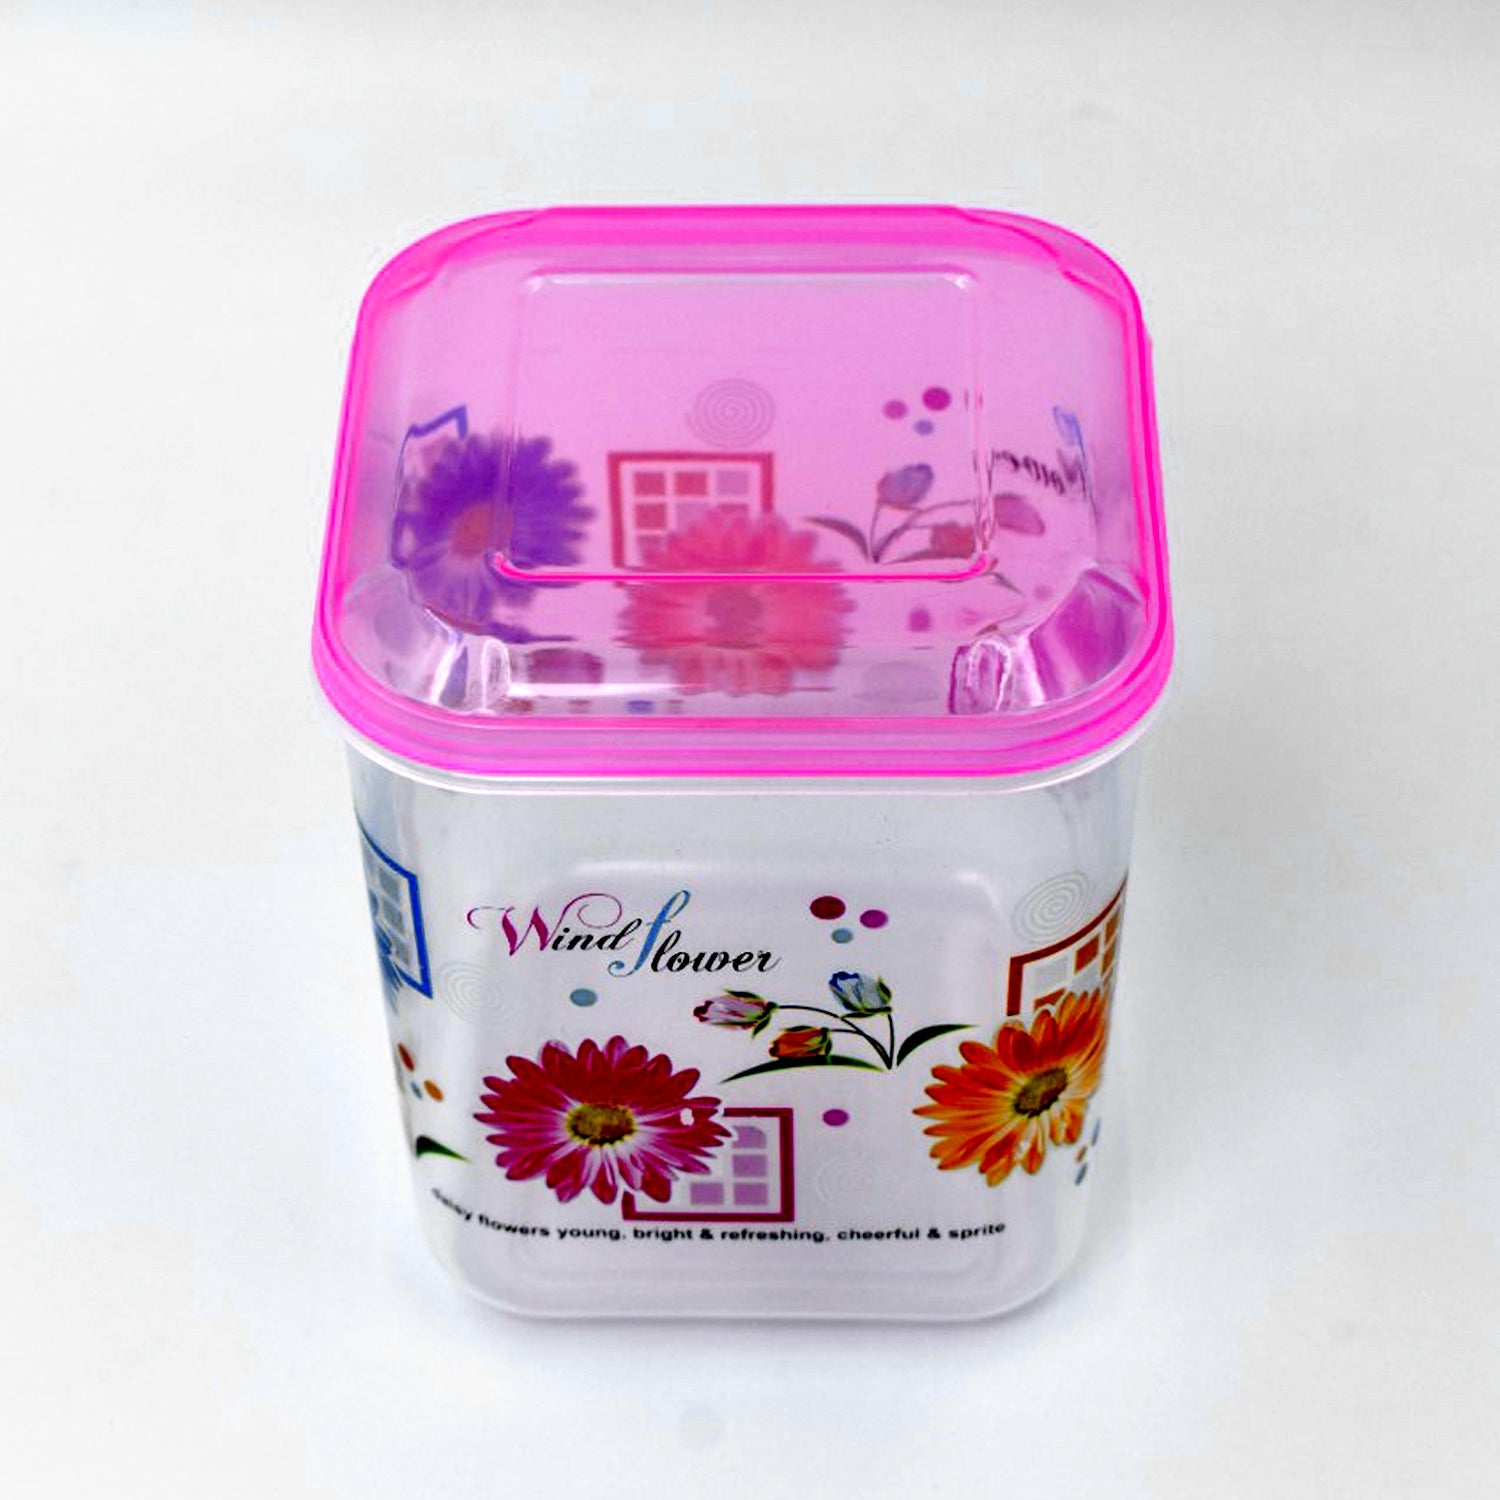 7045  3 Pc Square S Container Used For Storing Various Types Of Items And Stuffs.